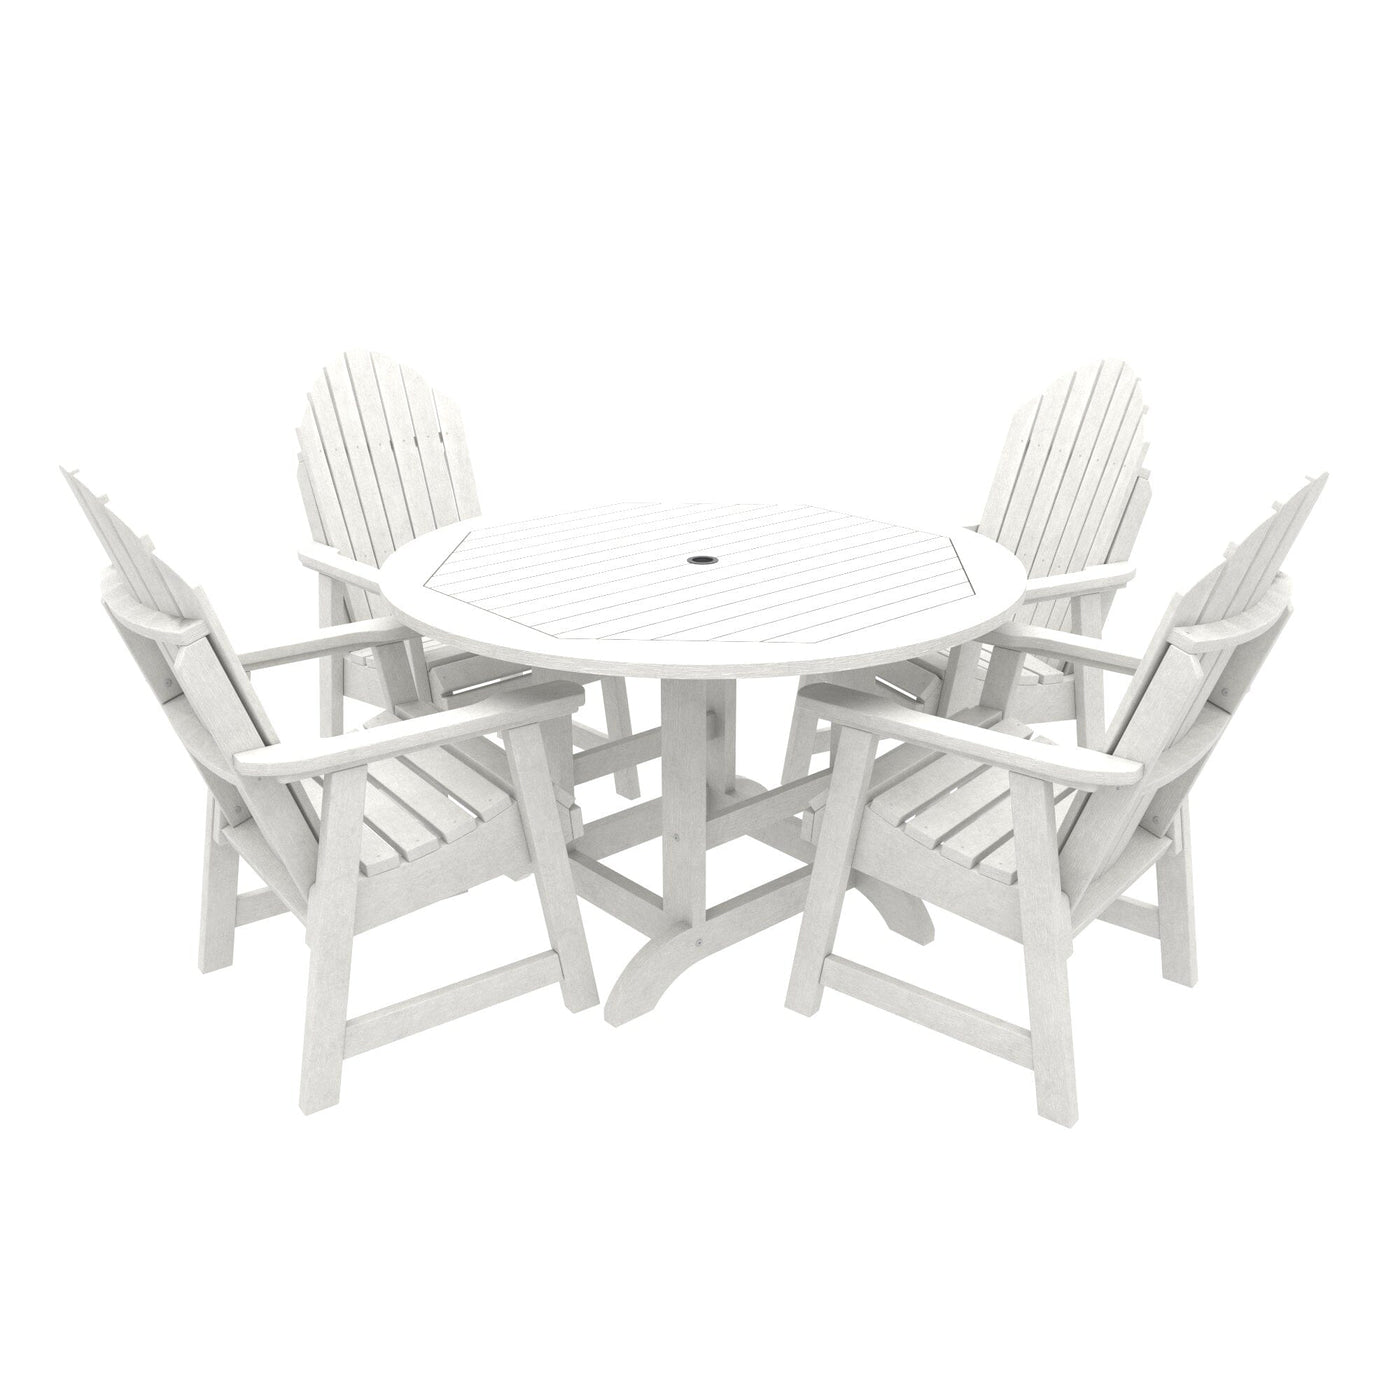 Commercial Grade 5 Pc Muskoka Adirondack Dining Set with 48” Table Kitted Sets Sequoia Professional White 